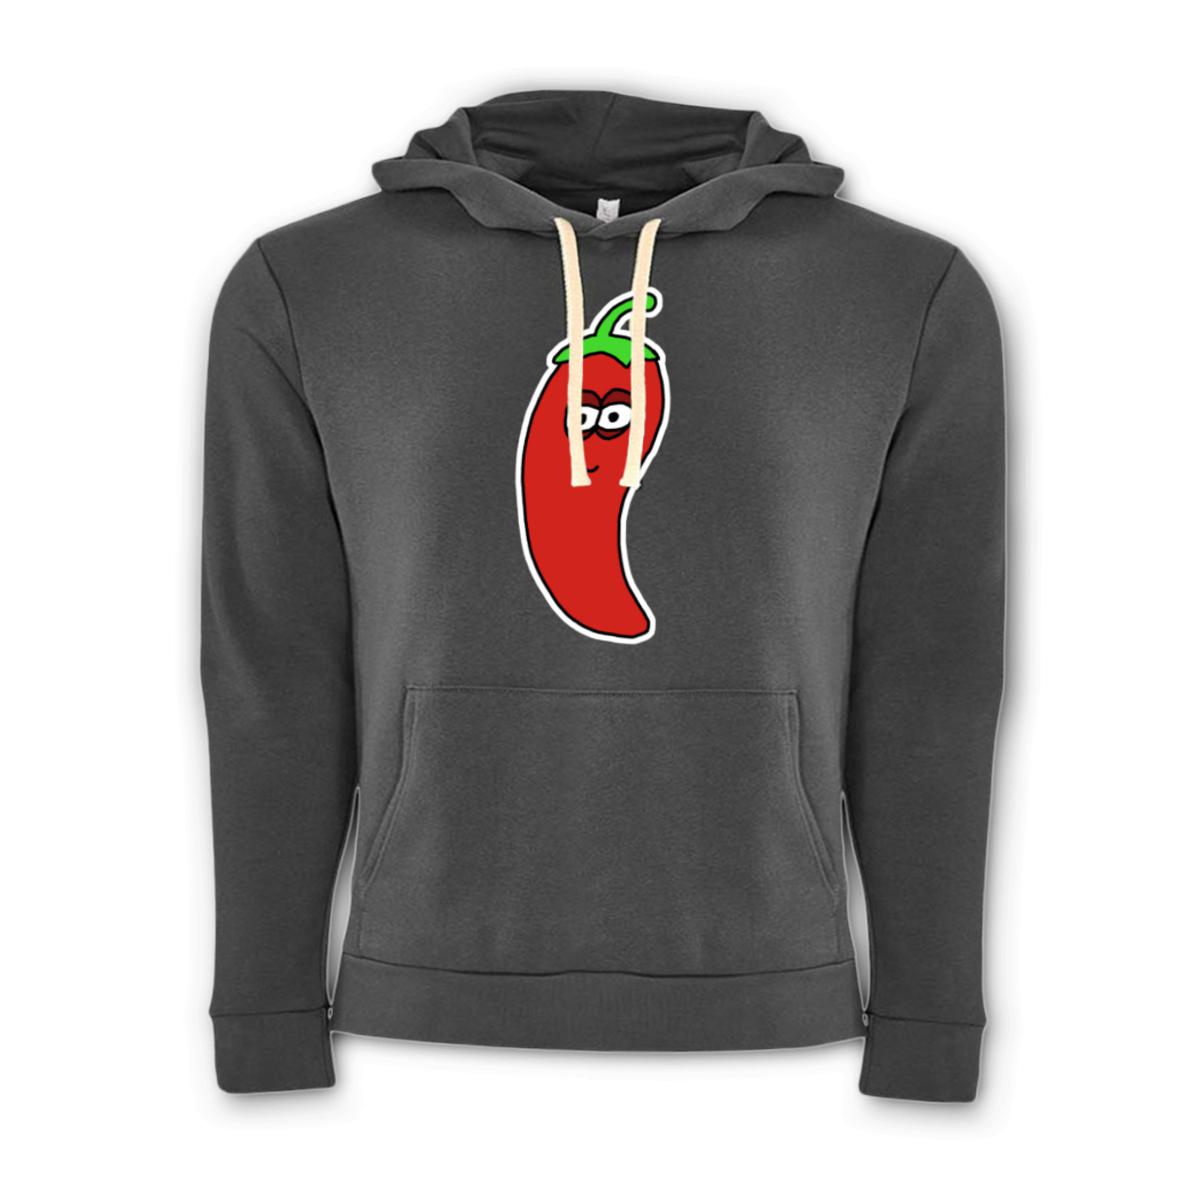 Chili Pepper Unisex Pullover Hoodie Double Extra Large heavy-metal